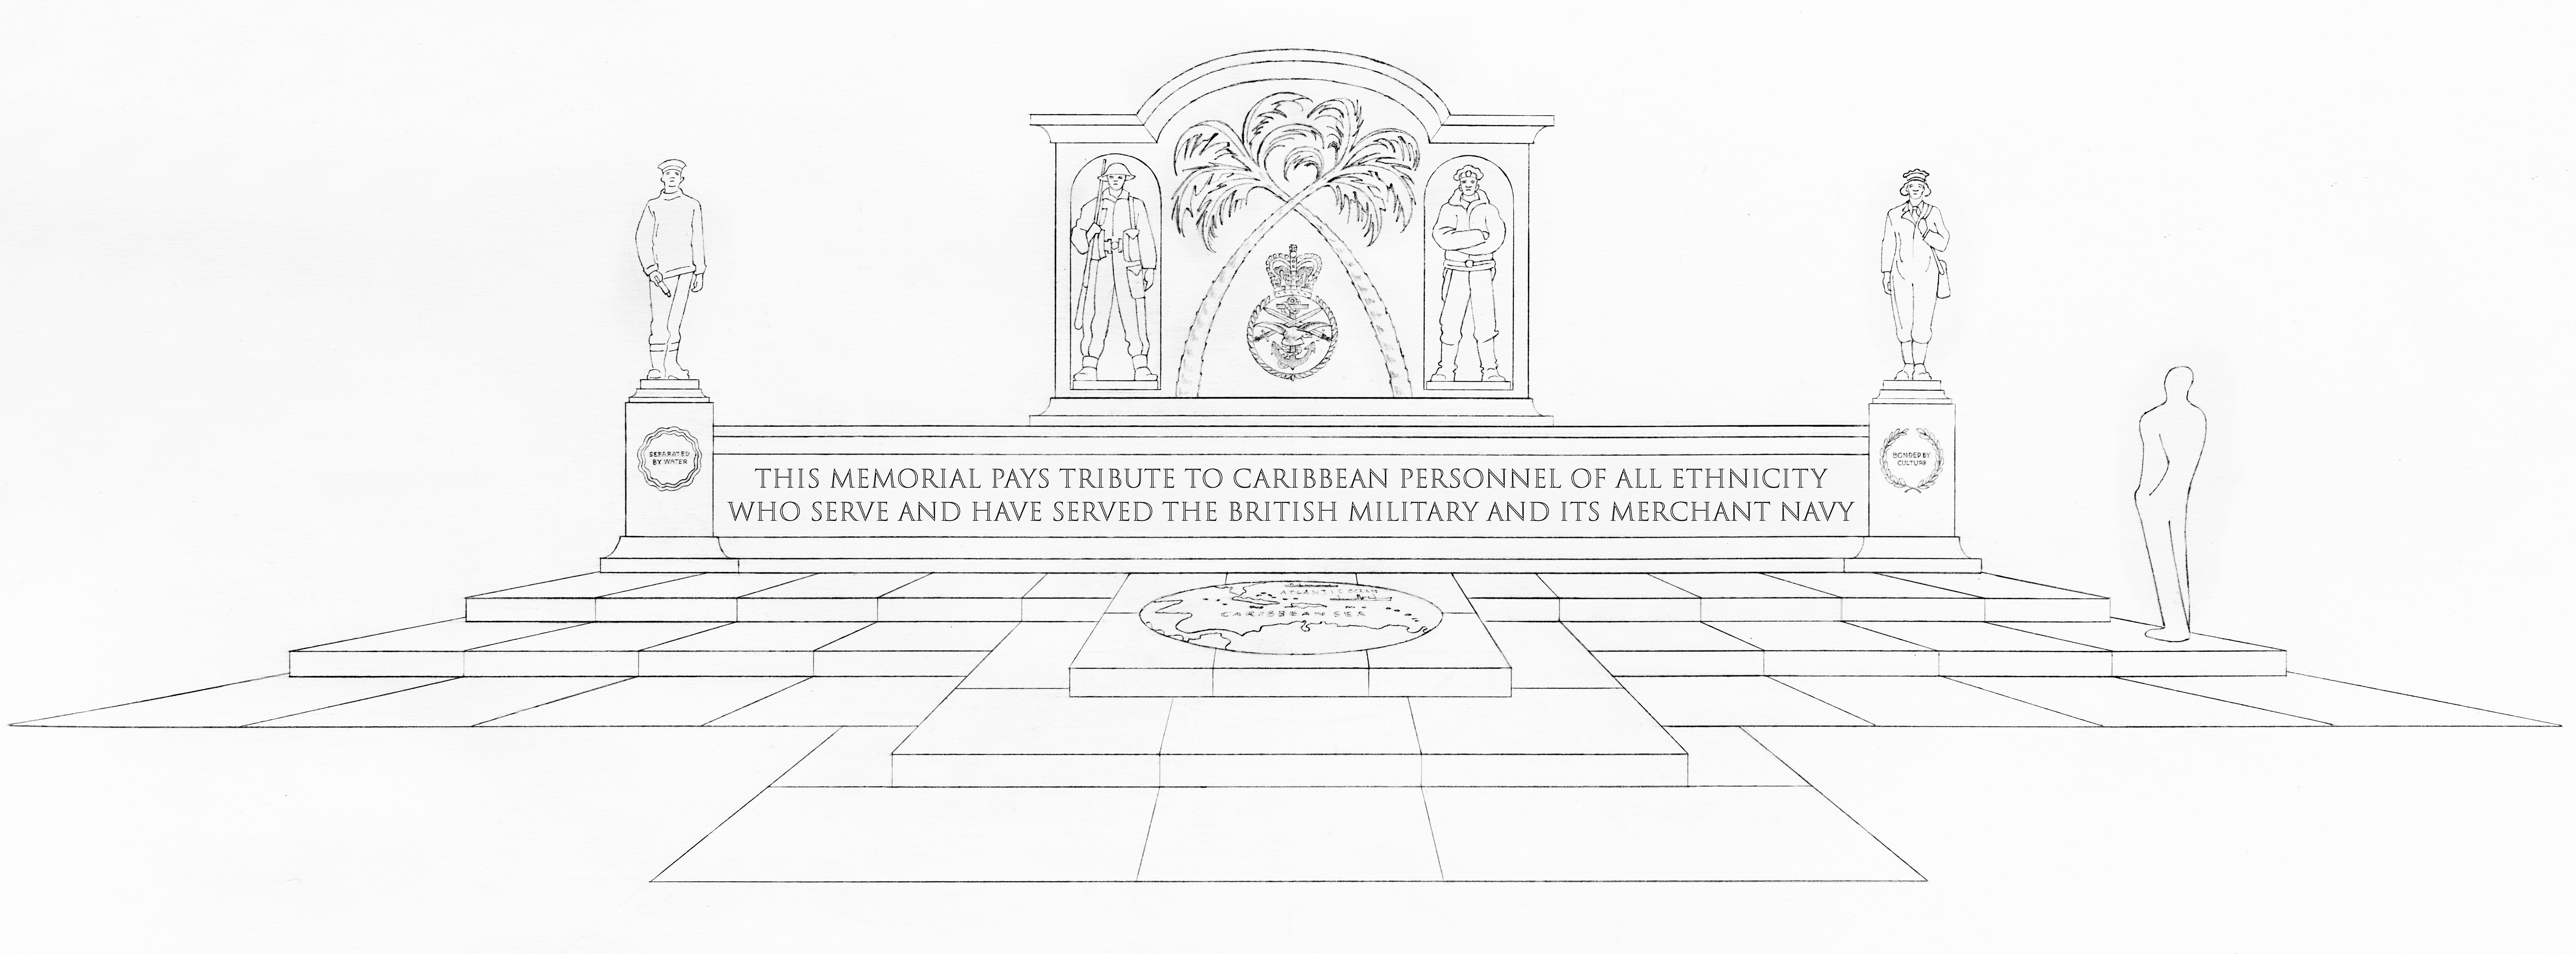 The monument design, by sculptor Martin Jennings